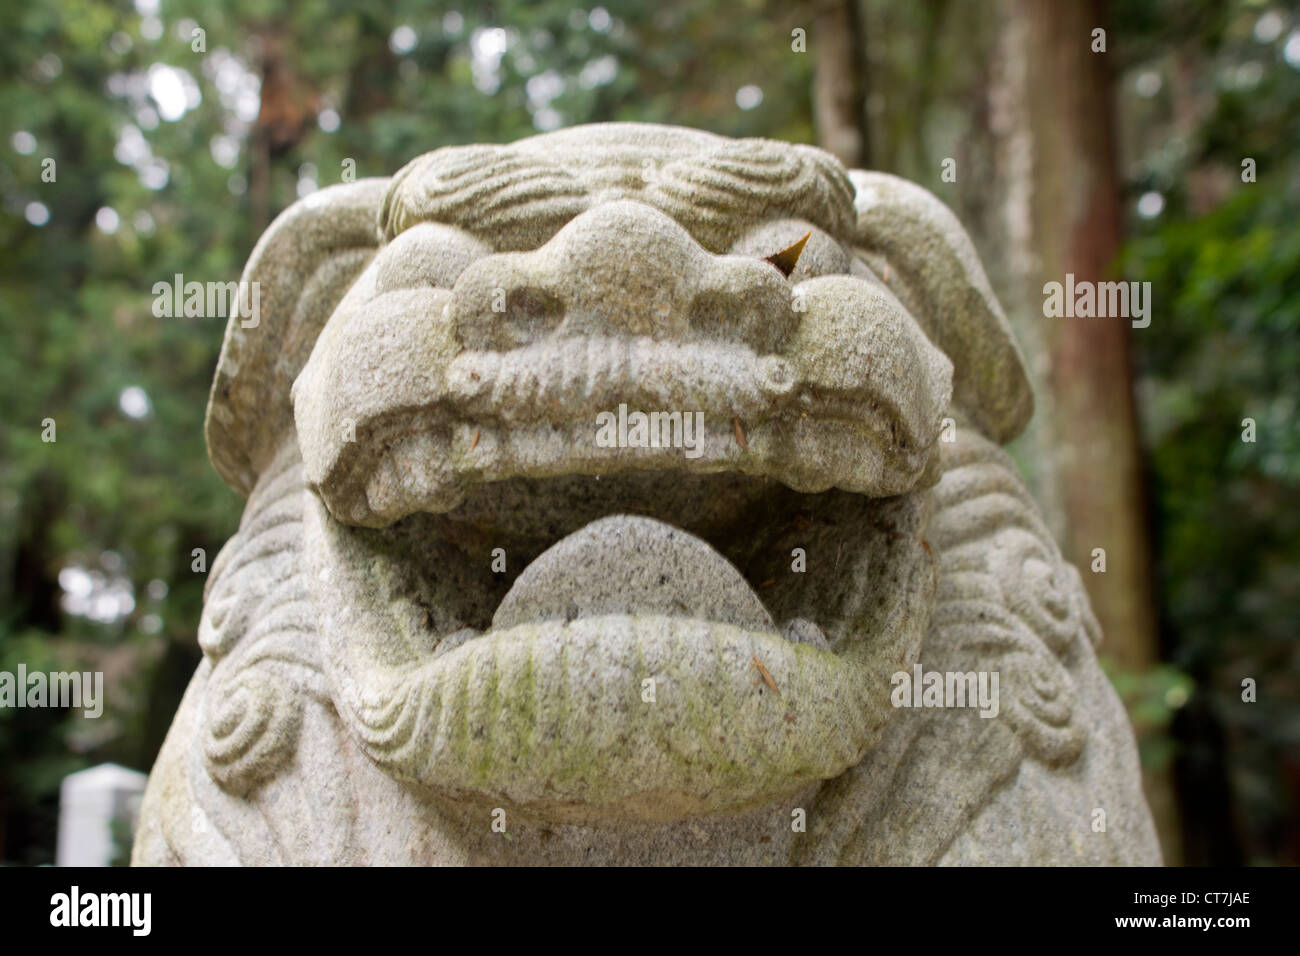 japanese stone statues in landscape